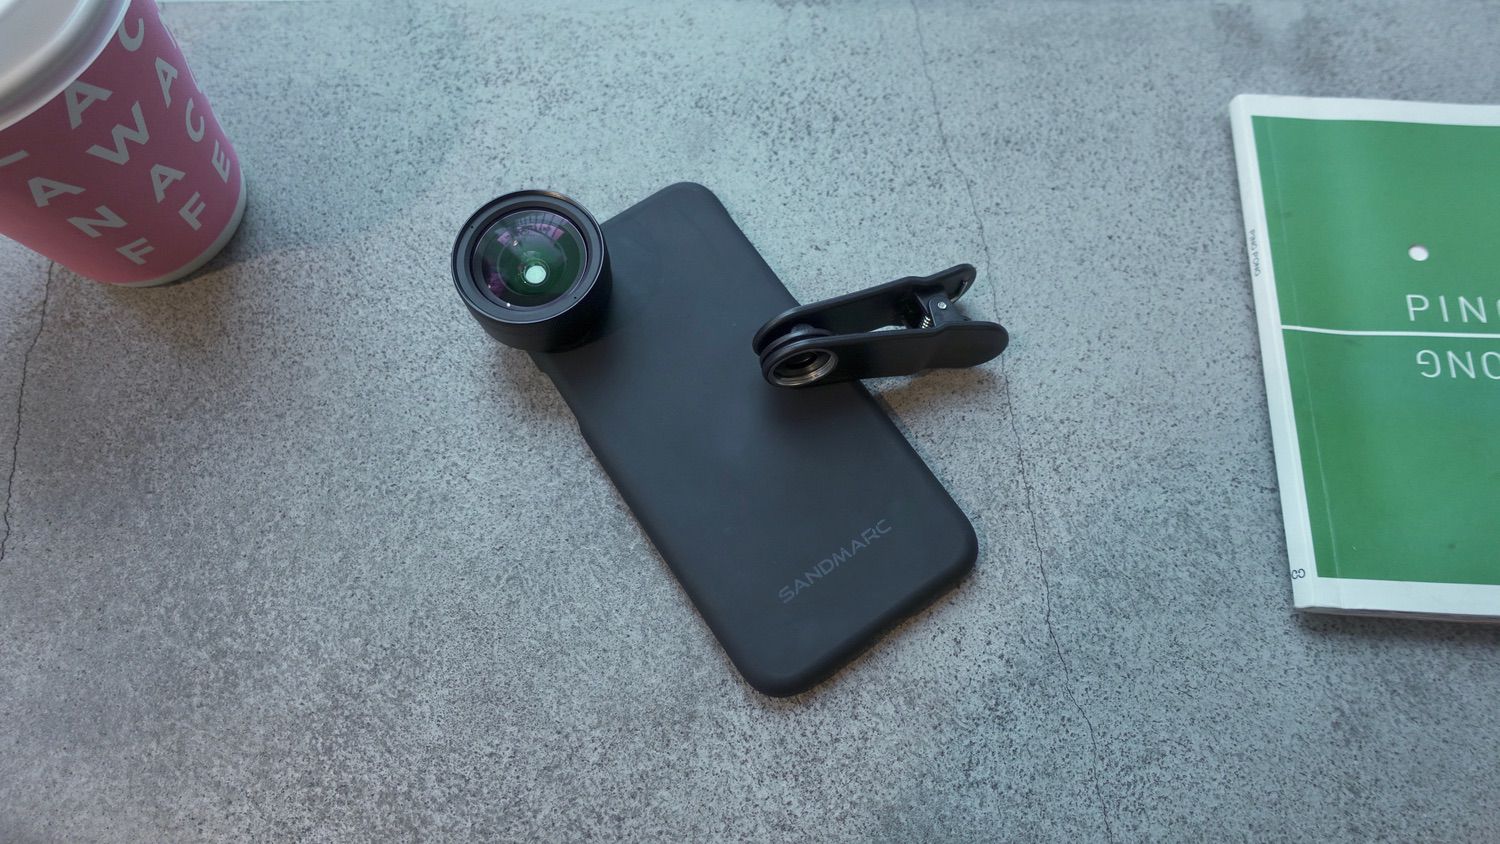 Review SandMarc’s impressive wide lens for iPhone X 9to5Mac